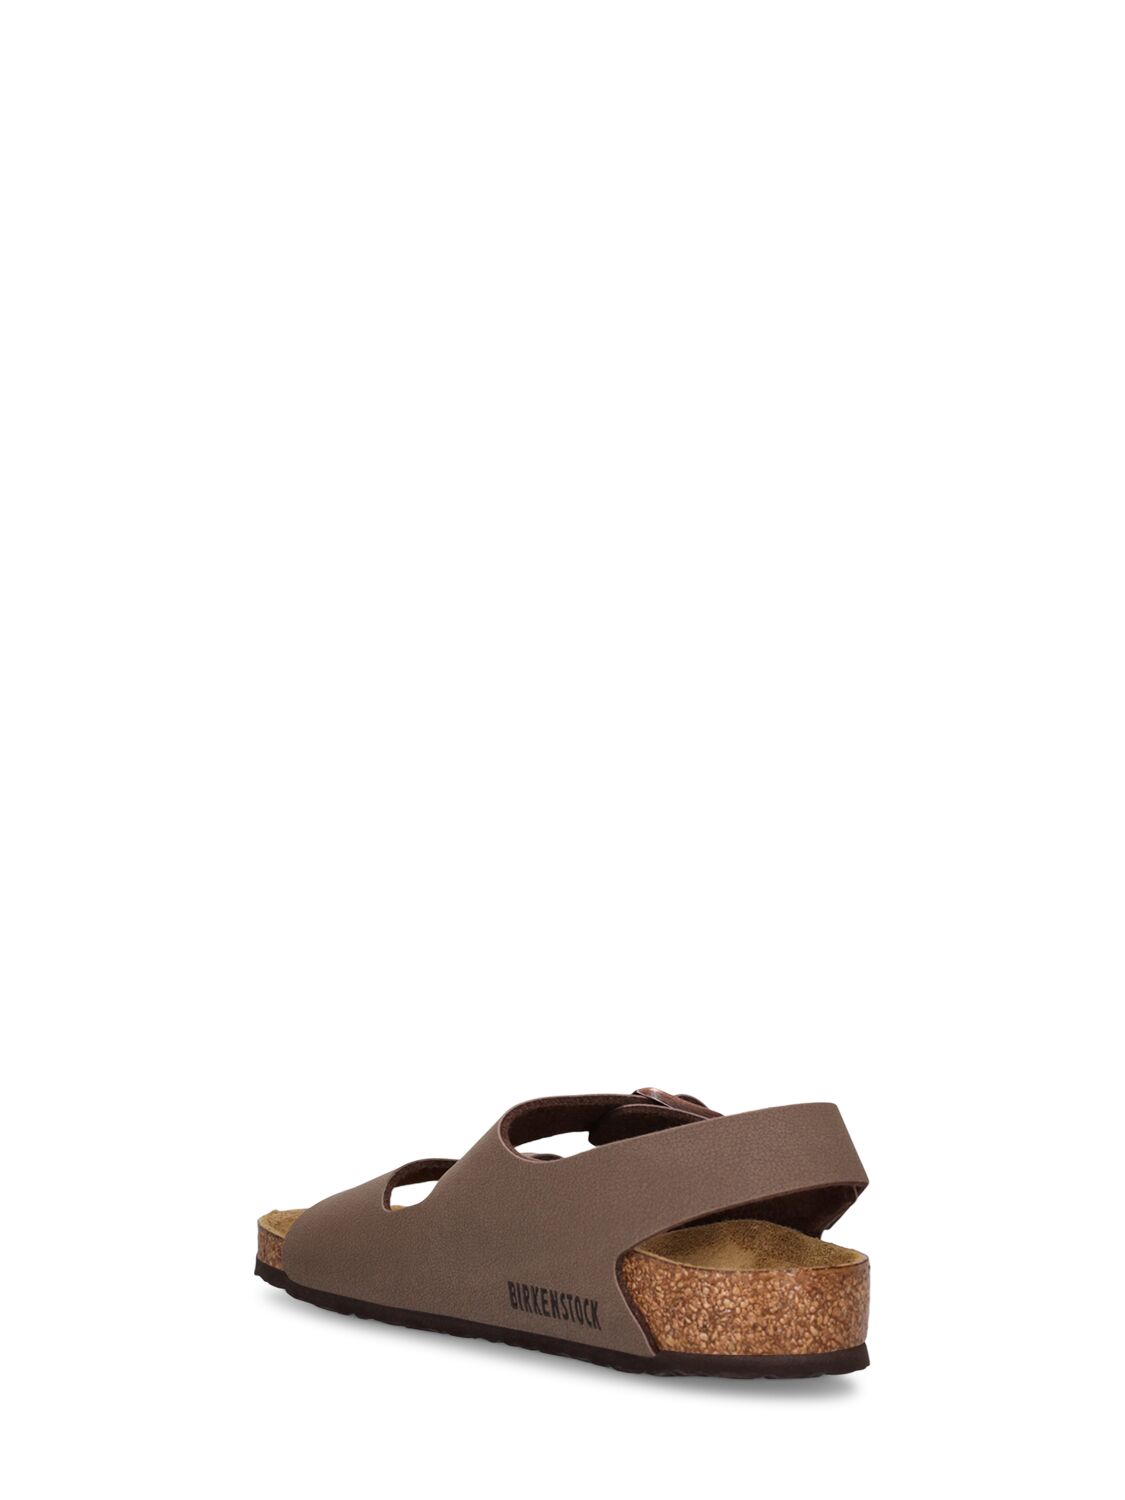 Shop Birkenstock Milano Faux Leather Sandals In Brown